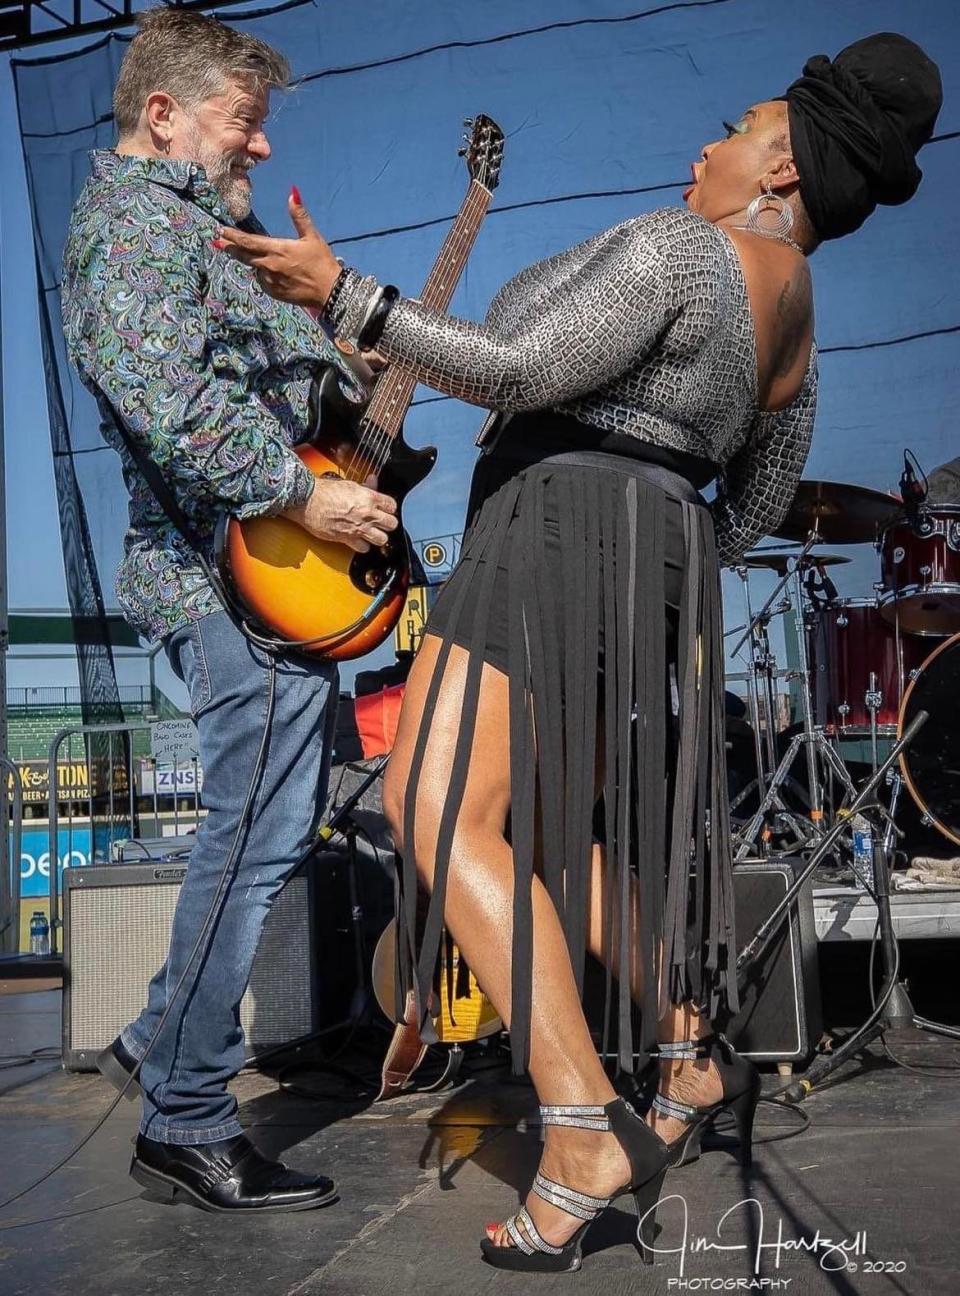 Annika Chambers performs with her husband Paul DesLauriers. Chambers is headlining Saturday's Blues Fest at Centennial Plaza in downtown Canton.